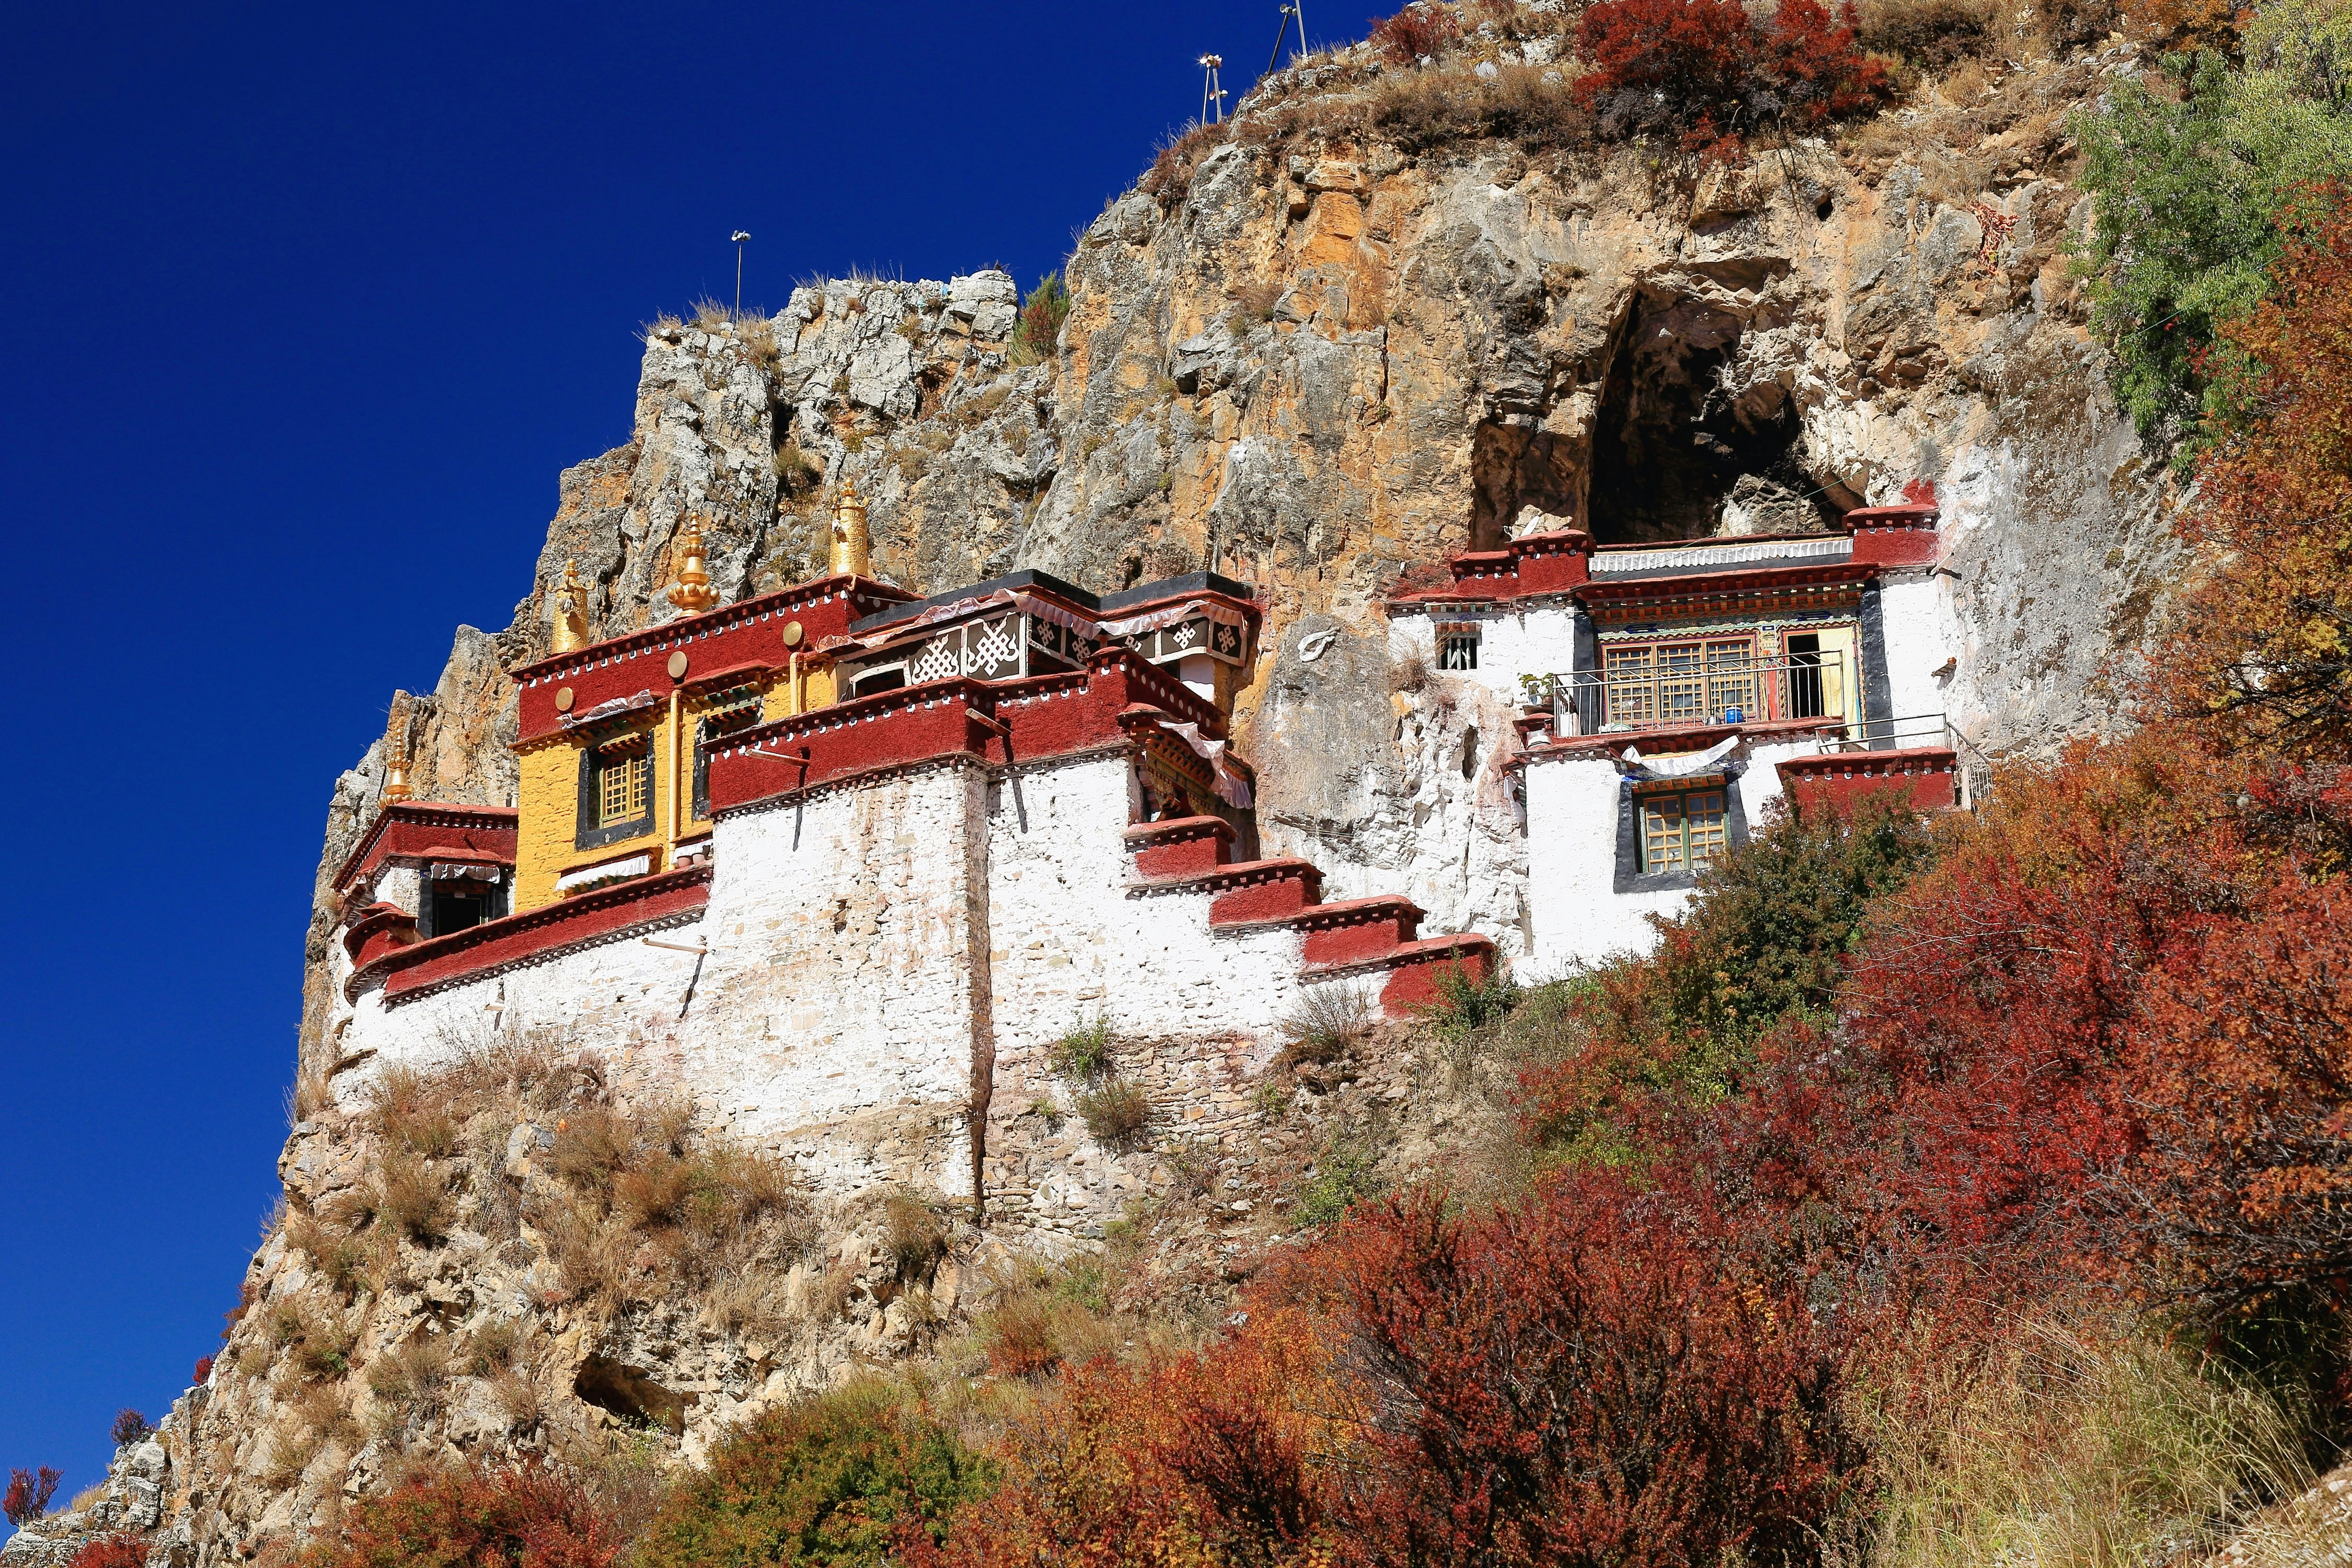 Lhakhang Puk-cave. Here Lhalung Pelgyi Dorje is said to have meditated for 22 years beginnign in 842 AD. Drak Yerpa monast.-complex of more than 80 meditation caves. Lhasa pref.-Tibet.